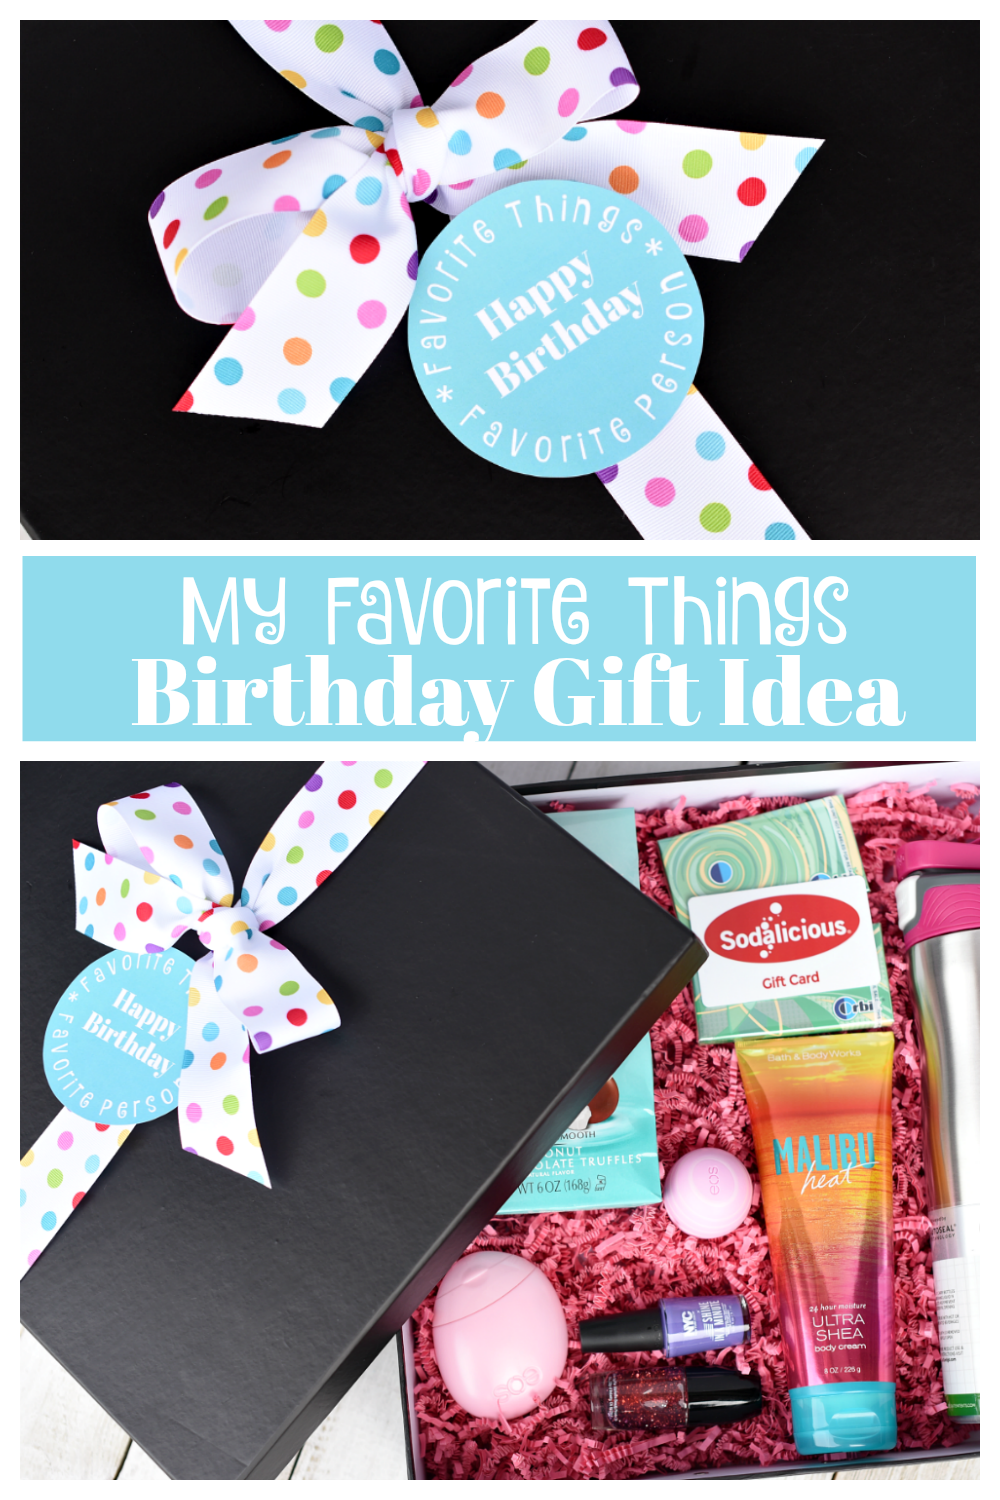 21 Fantastic Birthday Gift Ideas for Someone Special by Photojaanic - Issuu